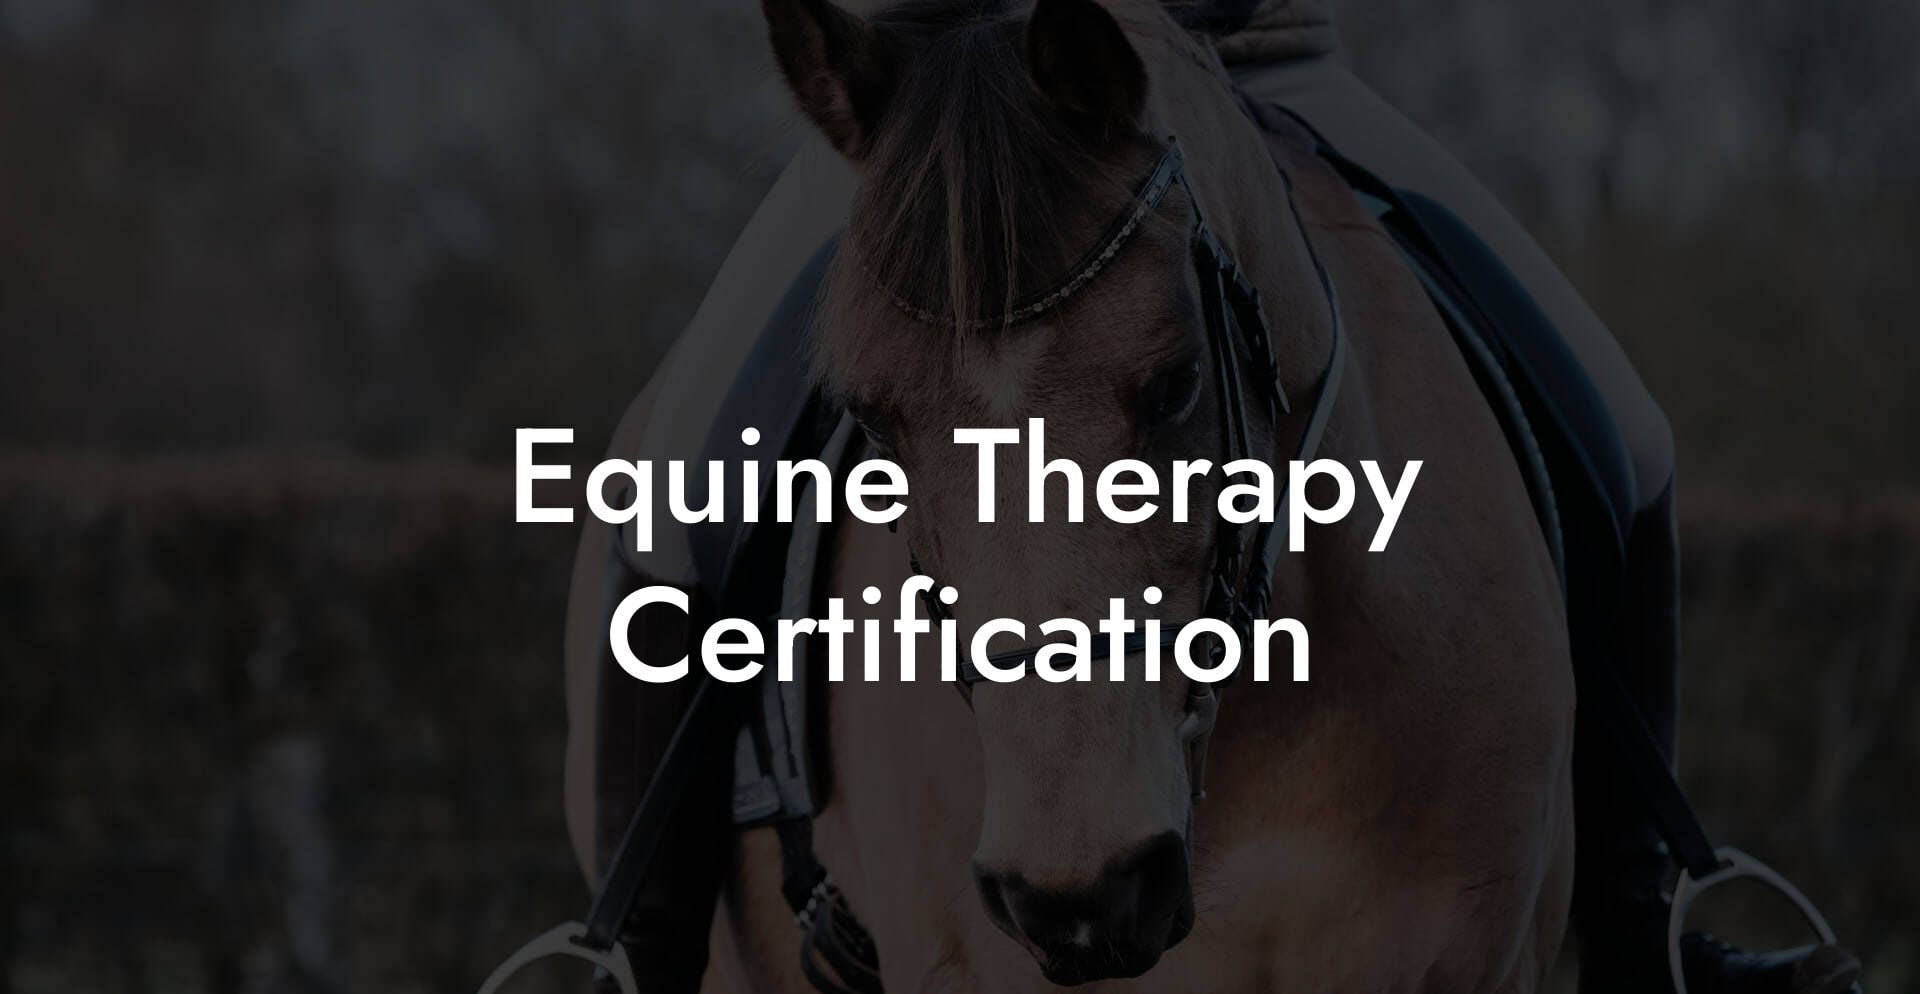 Equine Therapy Certification How To Own a Horse